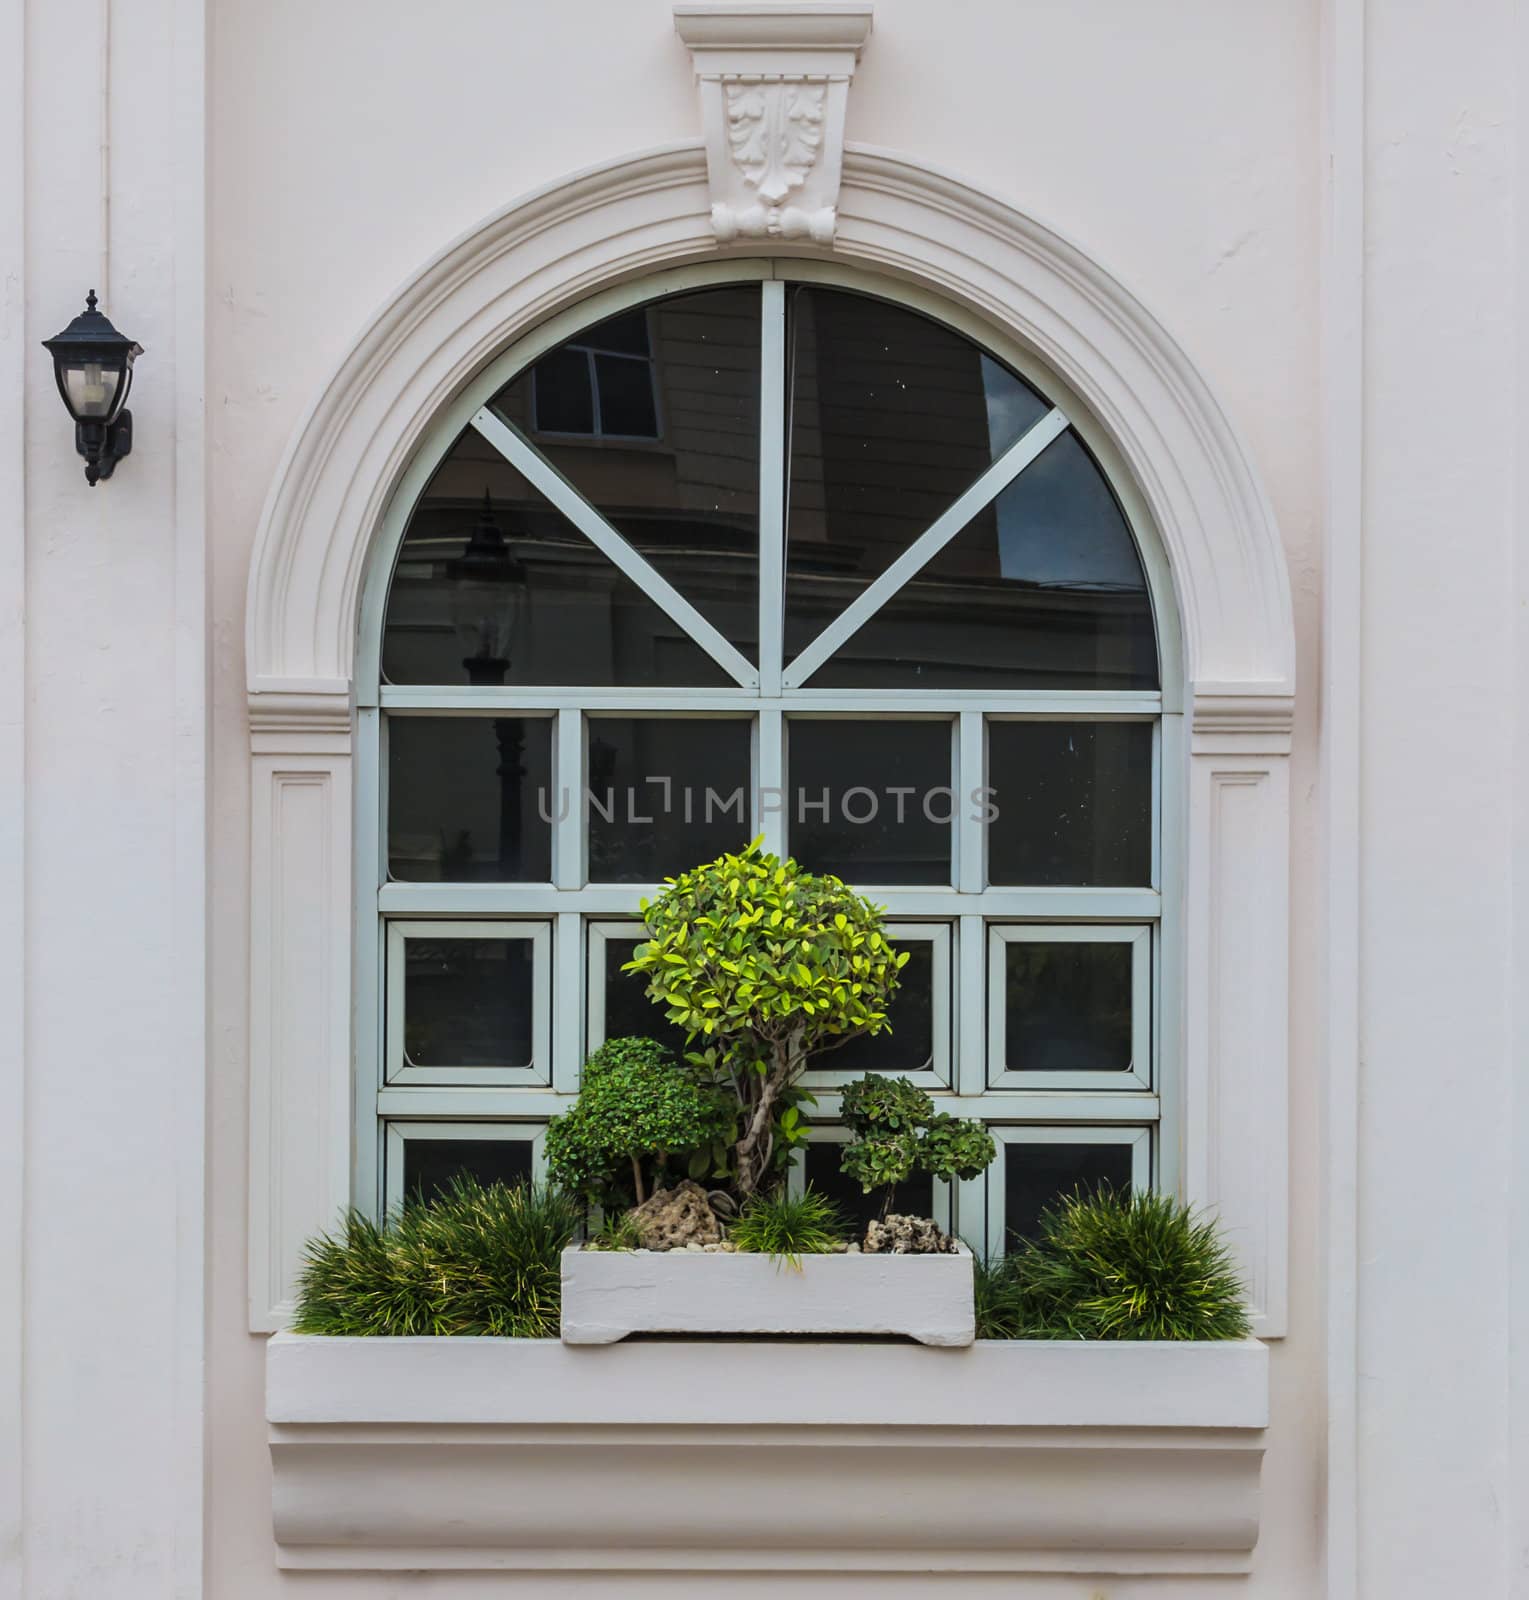 Arch window with bonsai decoration and street lamp reflection.